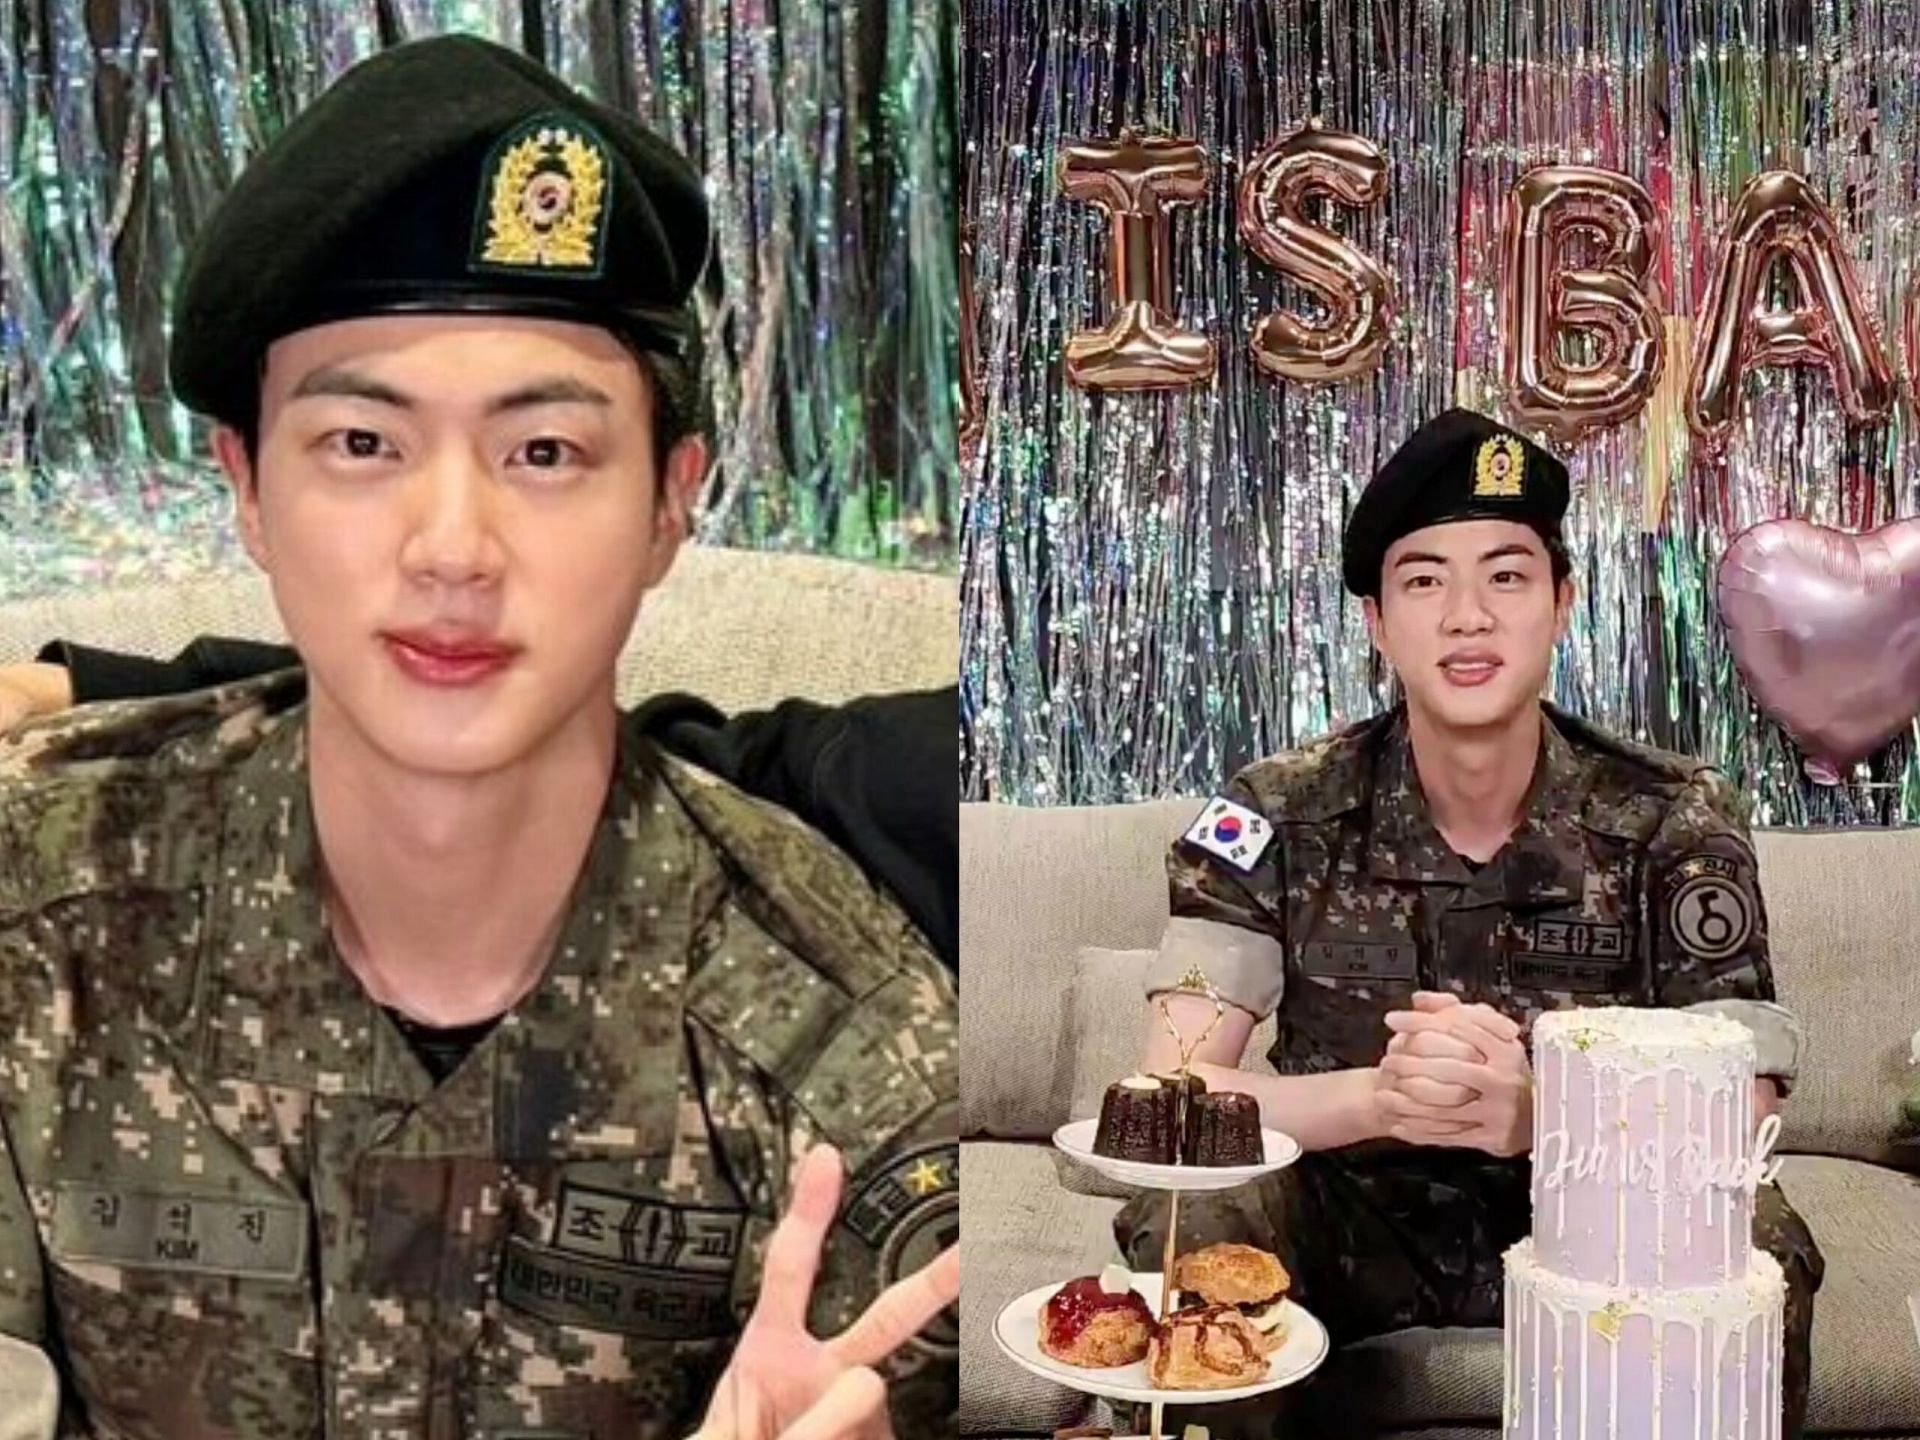 BTS&rsquo; Jin bids an emotional farewell to his fellow soldiers and shares receiving a personal note on military discharge (Image via X)